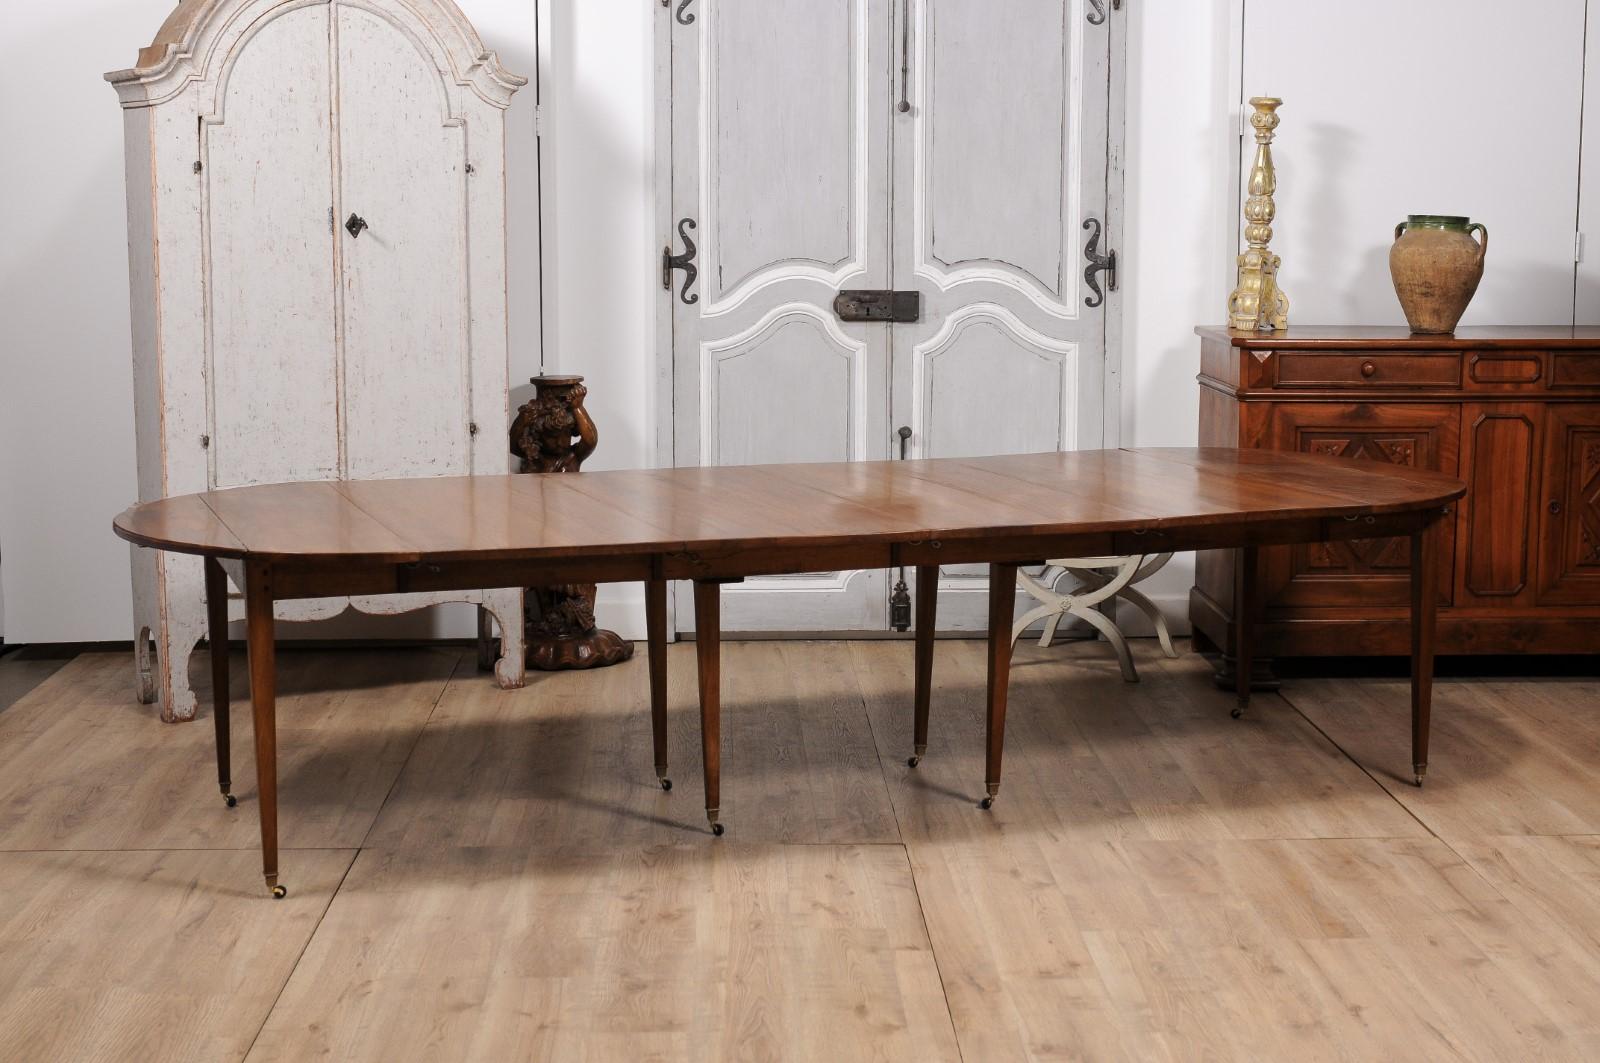 French Turn of the Century Extension Walnut Table With Five Leaves Circa 1900 For Sale 6